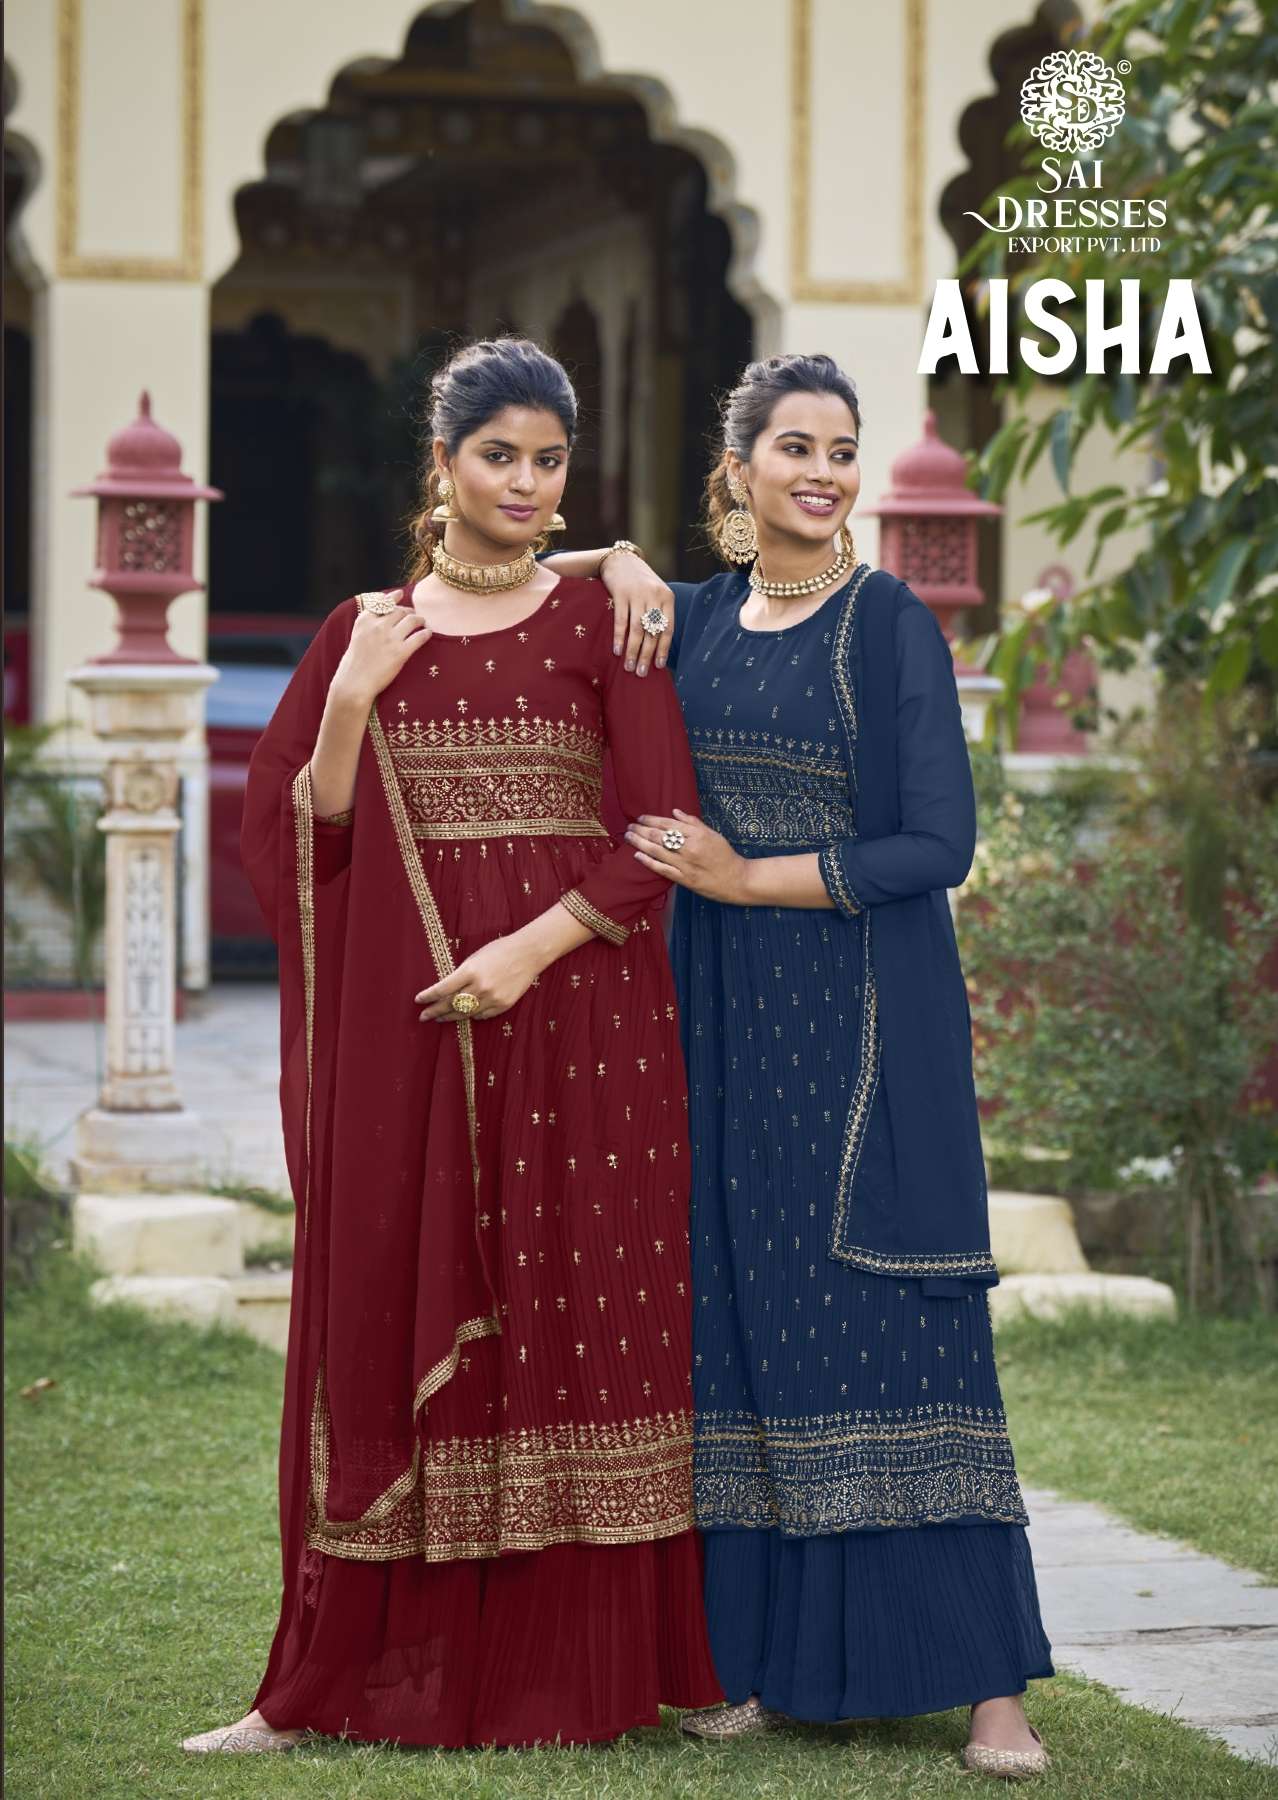 SAI DRESSES PRESENT AISHA READY TO WEAR NAYRA STYLE DESIGNER SUITS IN WHOLESALE RATE IN SURAT